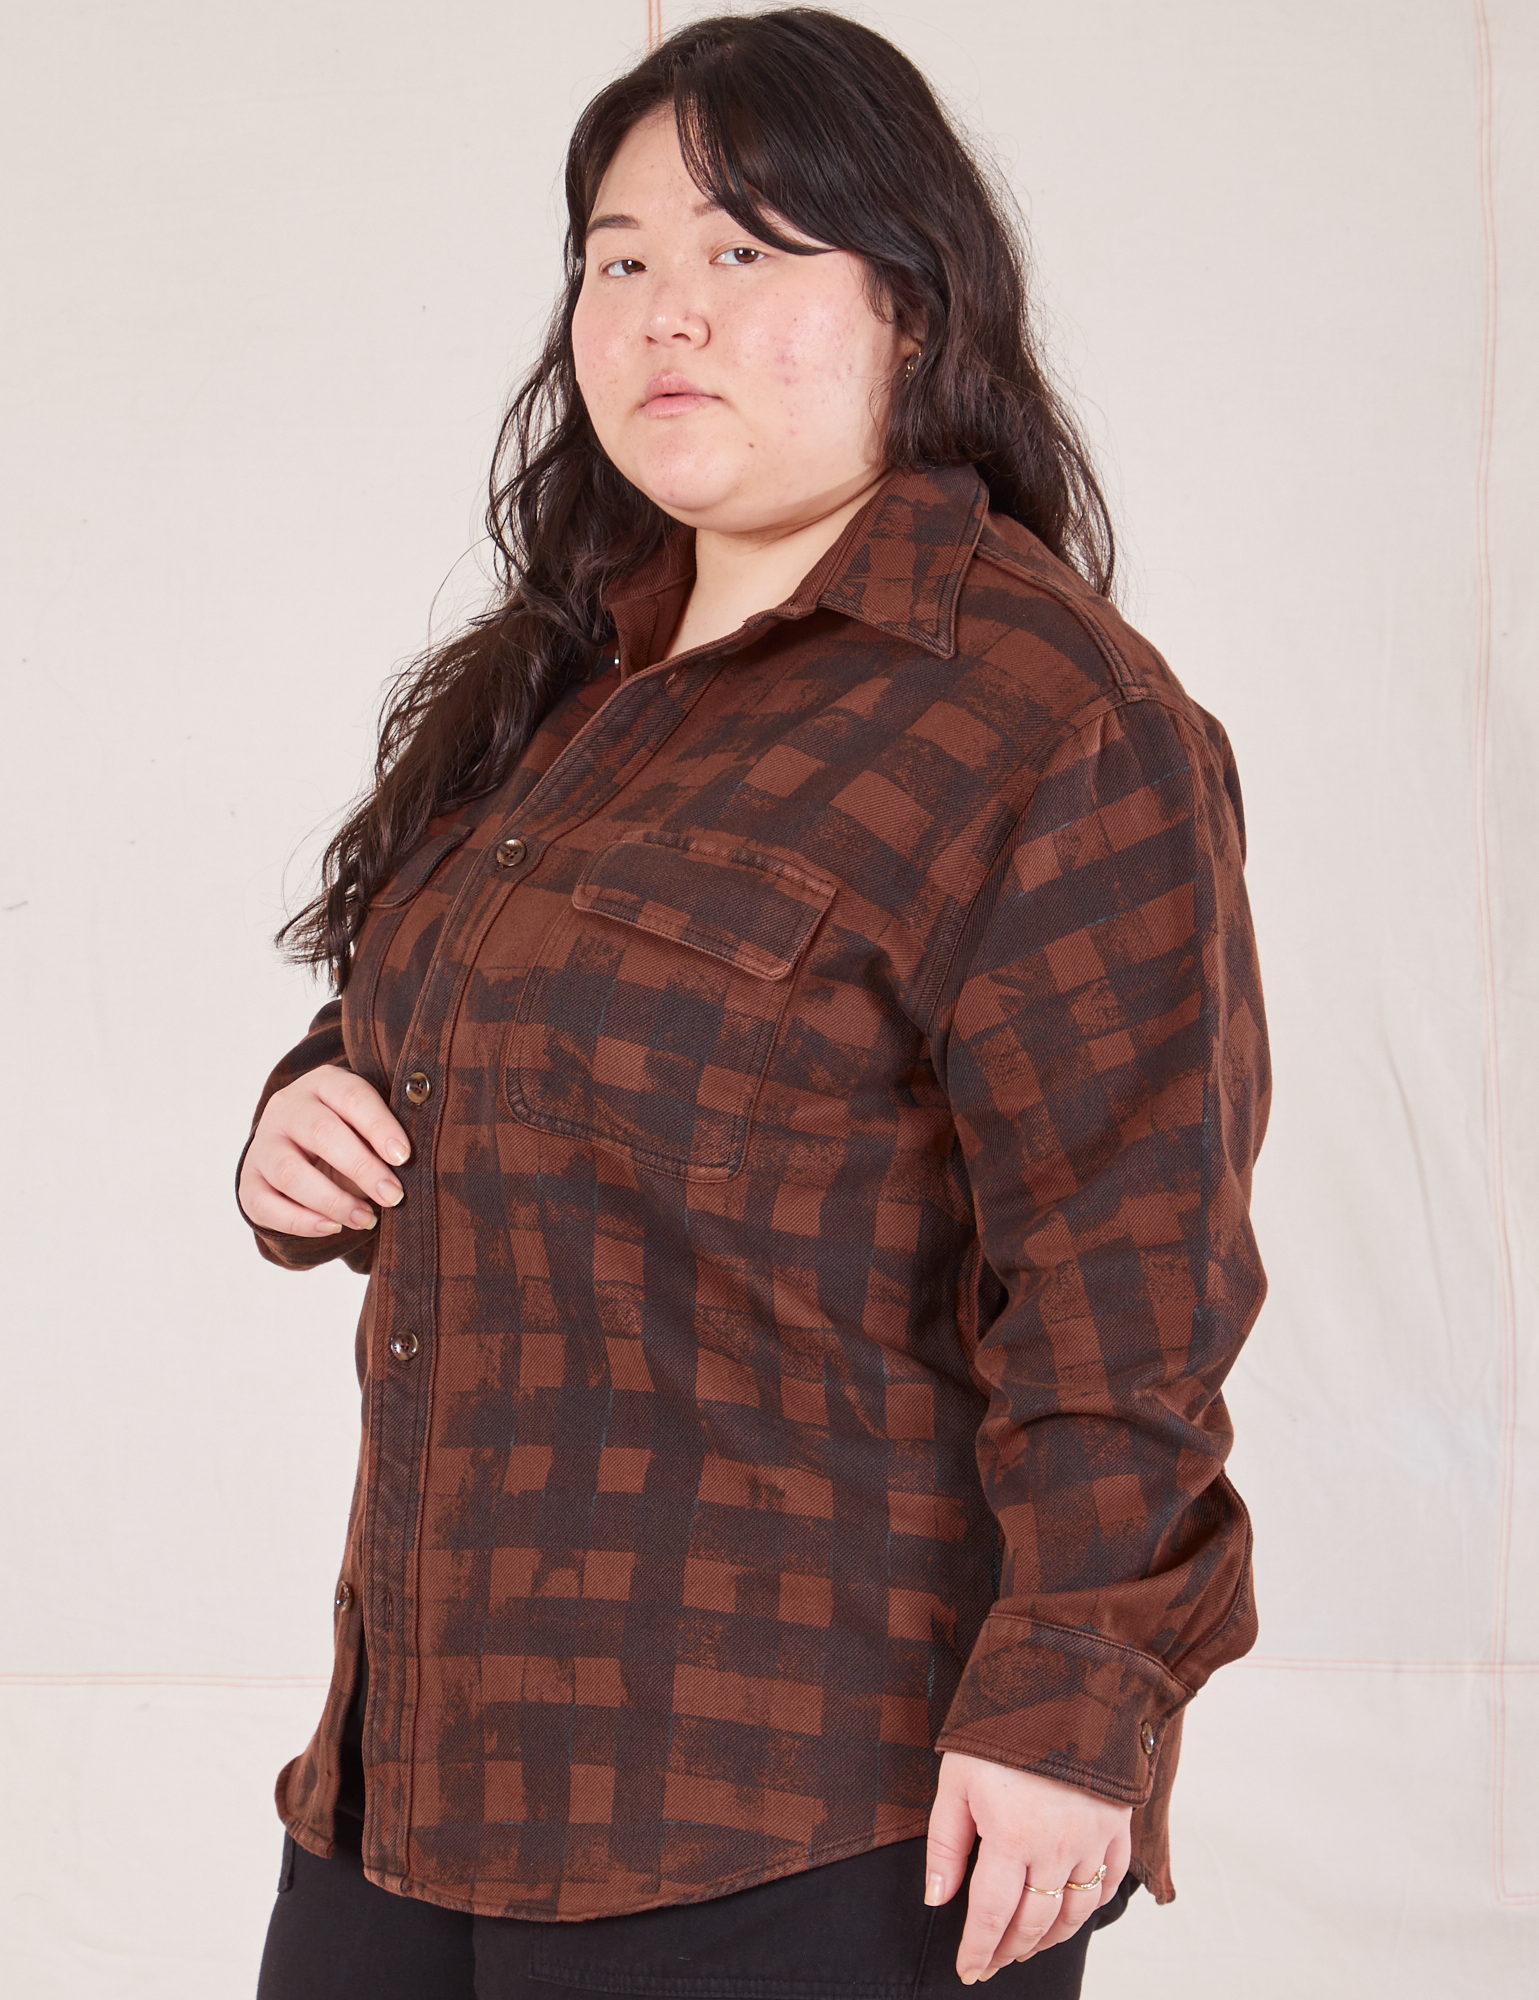 Angled view of Plaid Flannel Overshirt in Fudgesicle Brown on Ashley